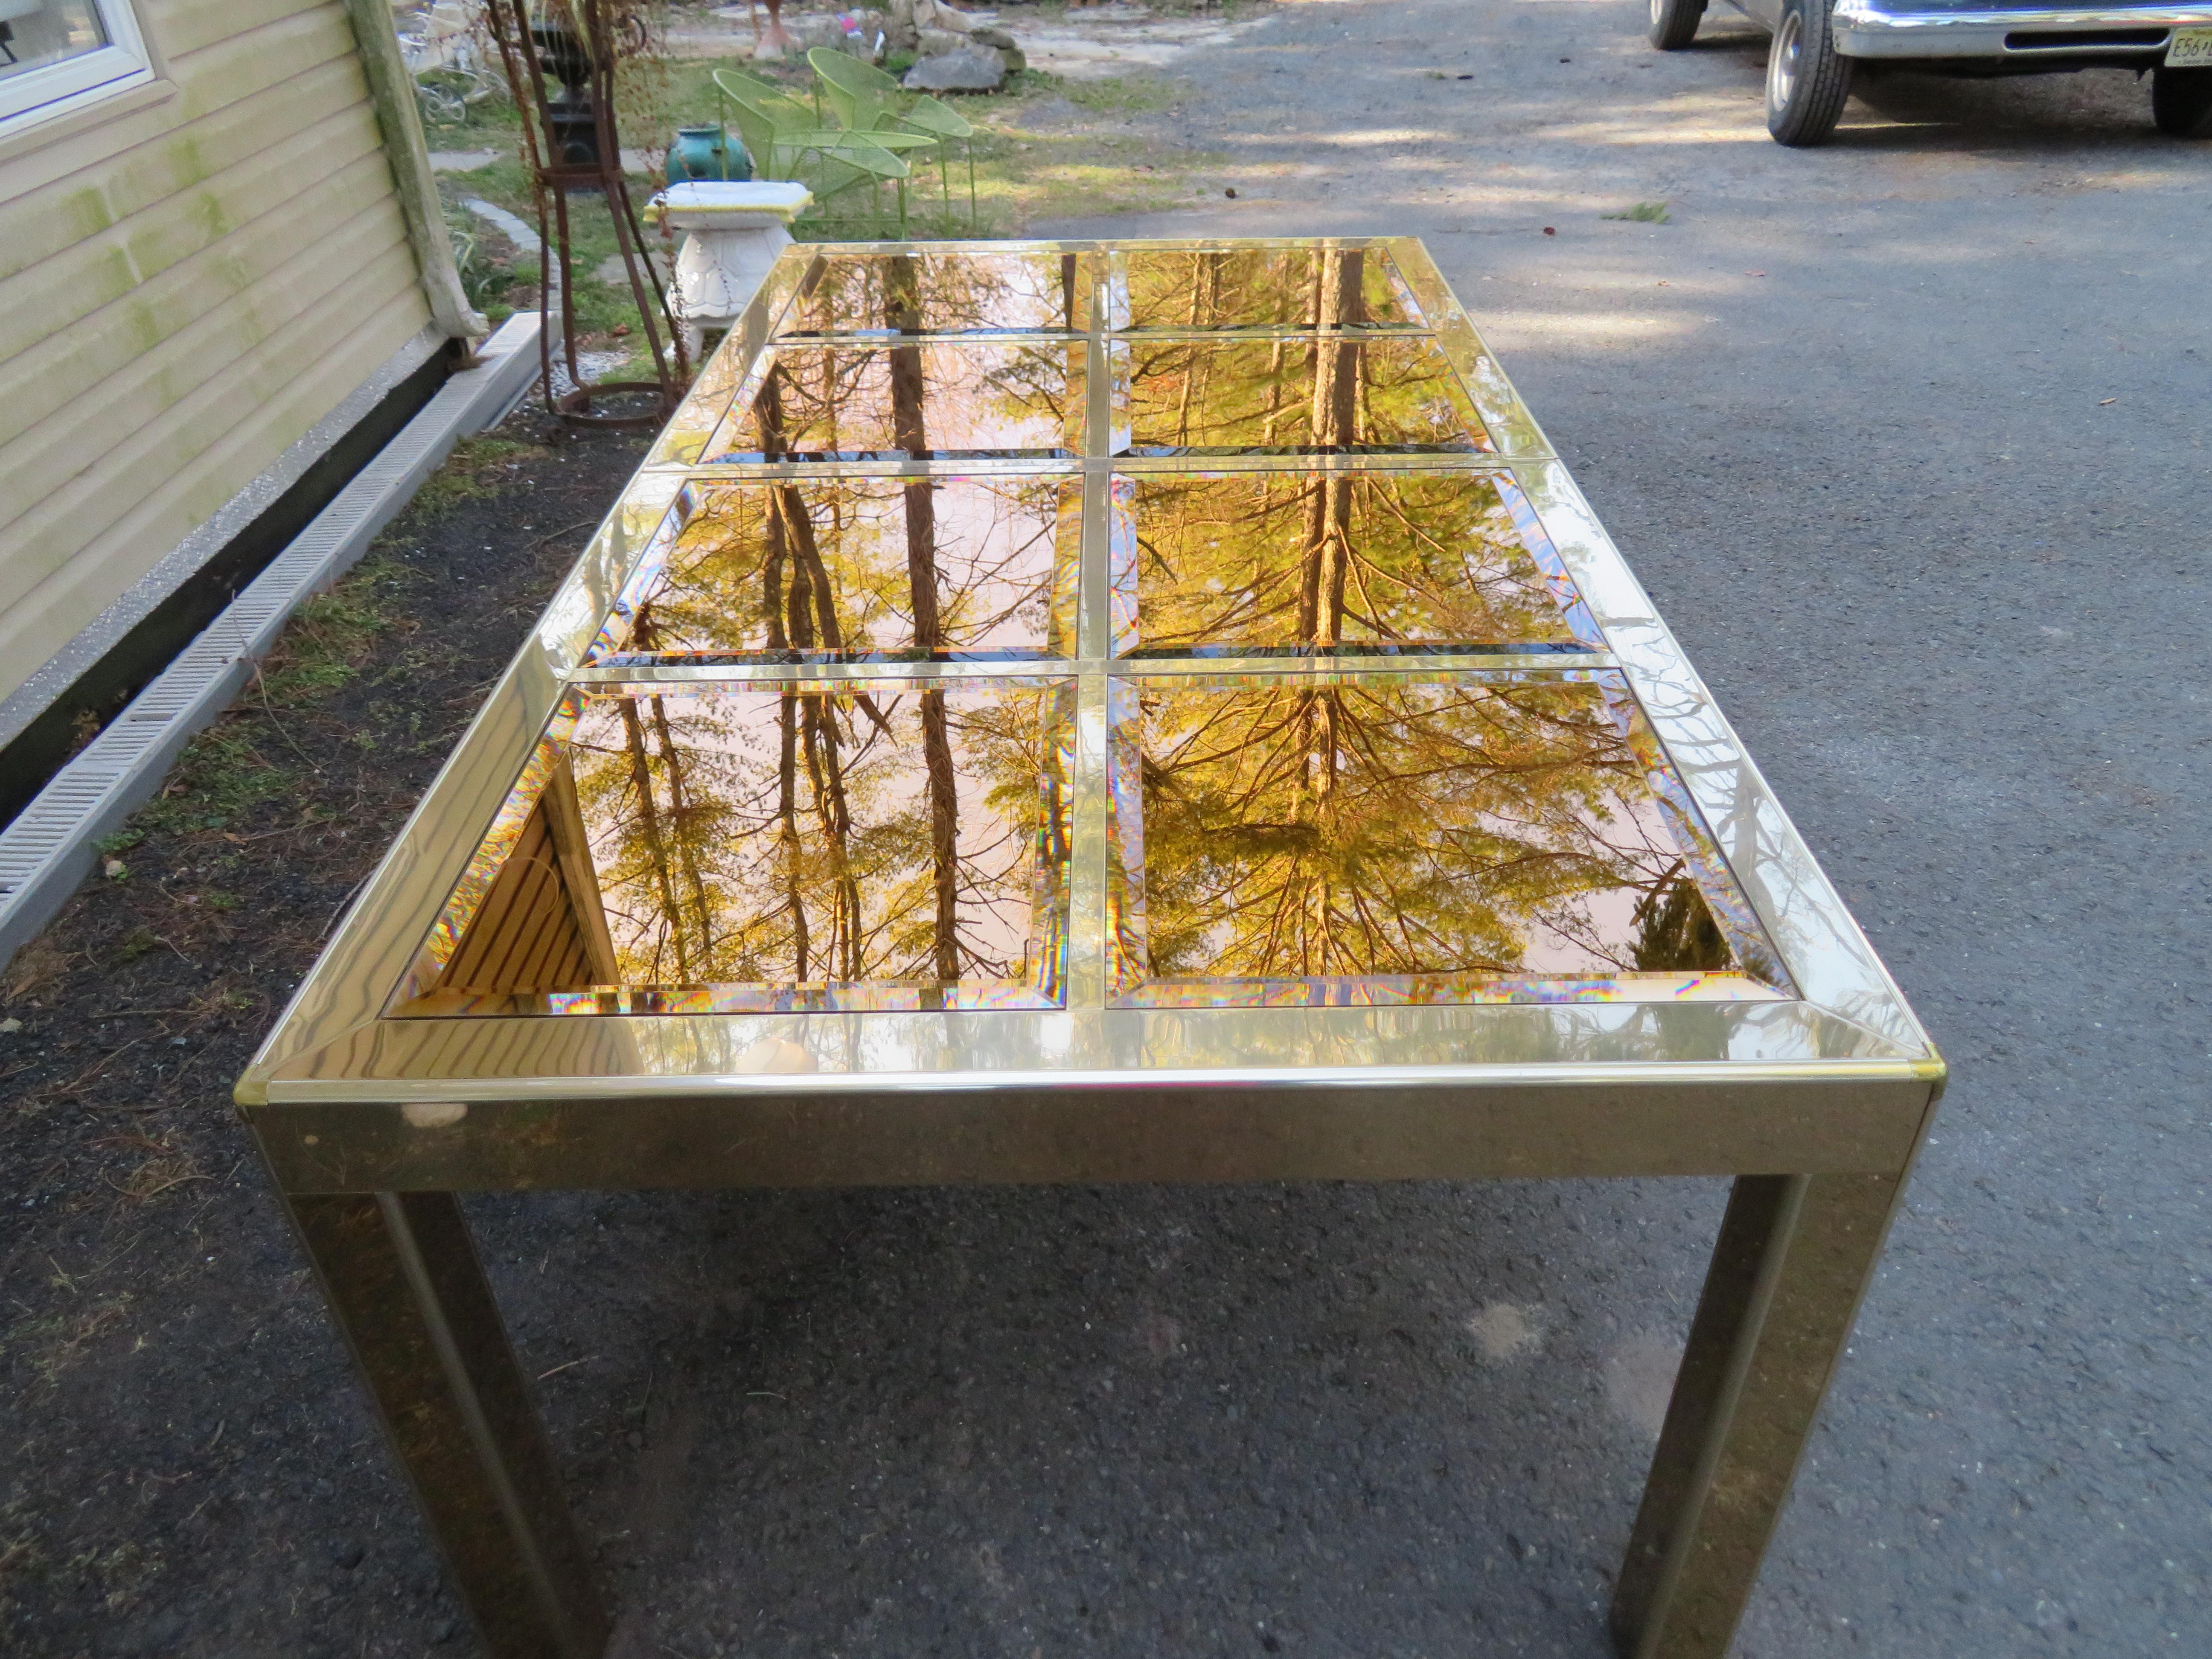 Brass framed parsons shape dining table by Mastercraft of Grand Rapids. The top of the table is an open grid into which inserts the 18 inch by 18 inch square shaped mirror panels which are beveled and are tinted a metallic bronze giving this table a